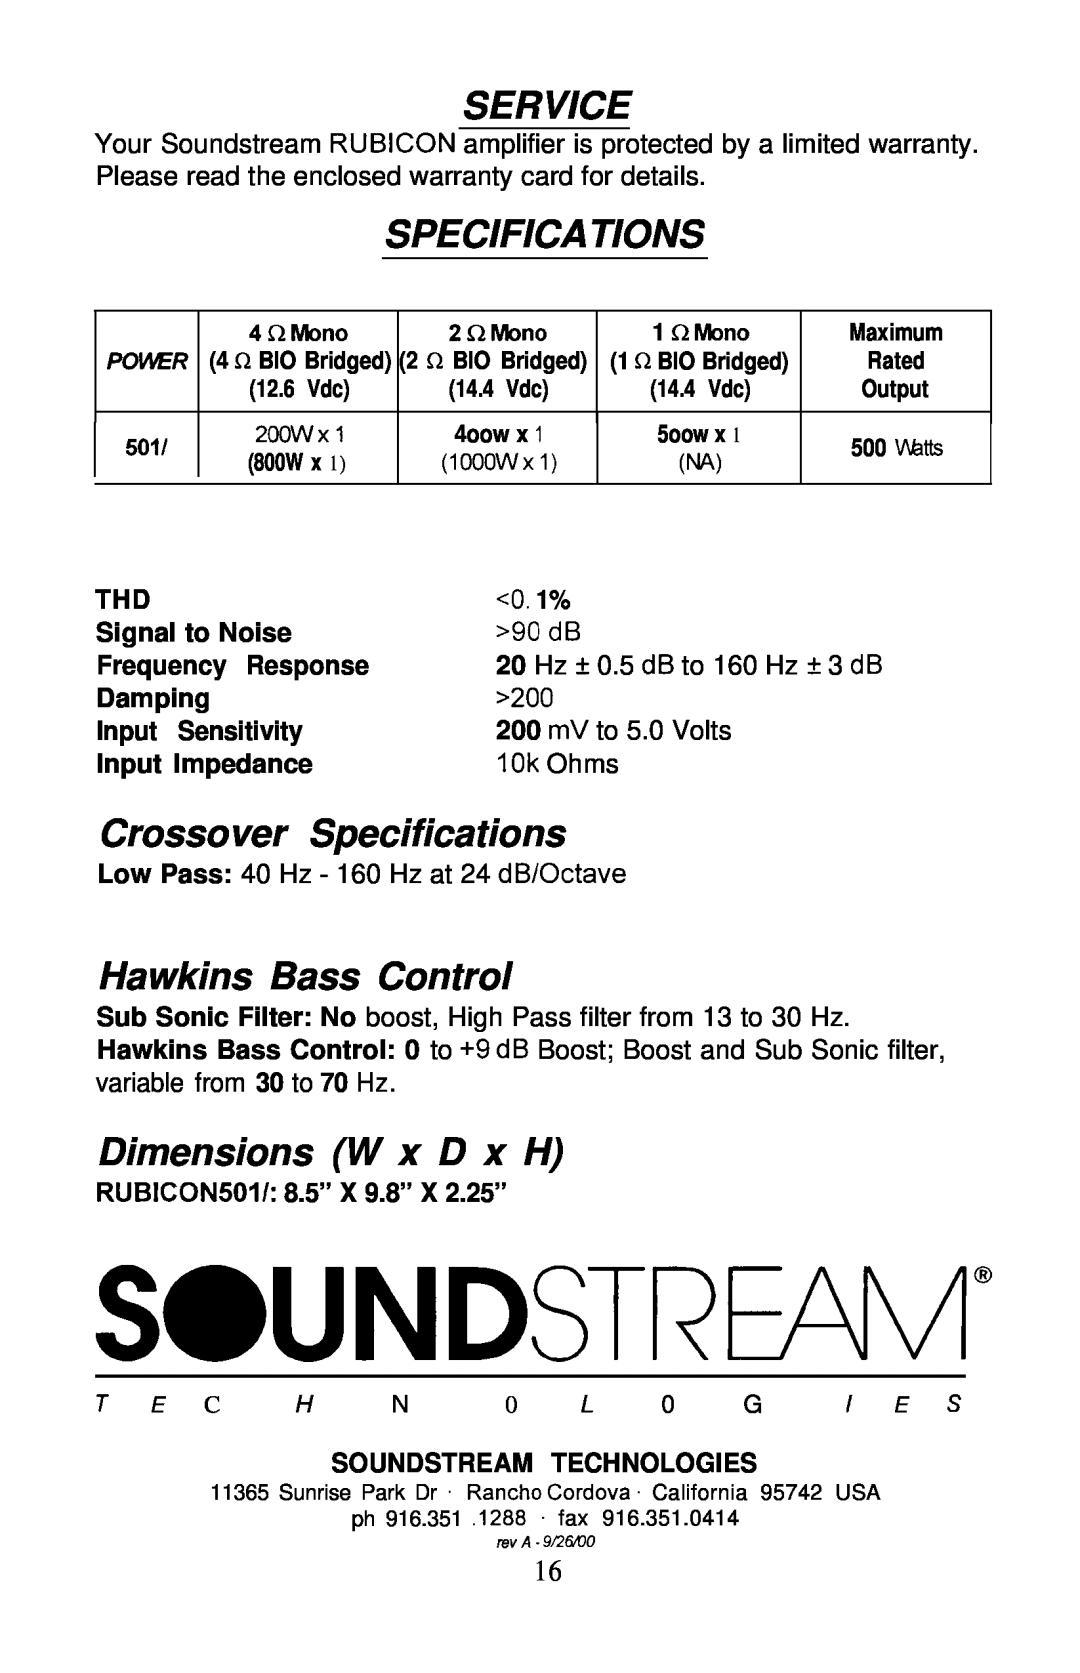 Soundstream Technologies 501 Service, Crossover Specifications, Hawkins Bass Control, Dimensions W x D x H, 10k Ohms 